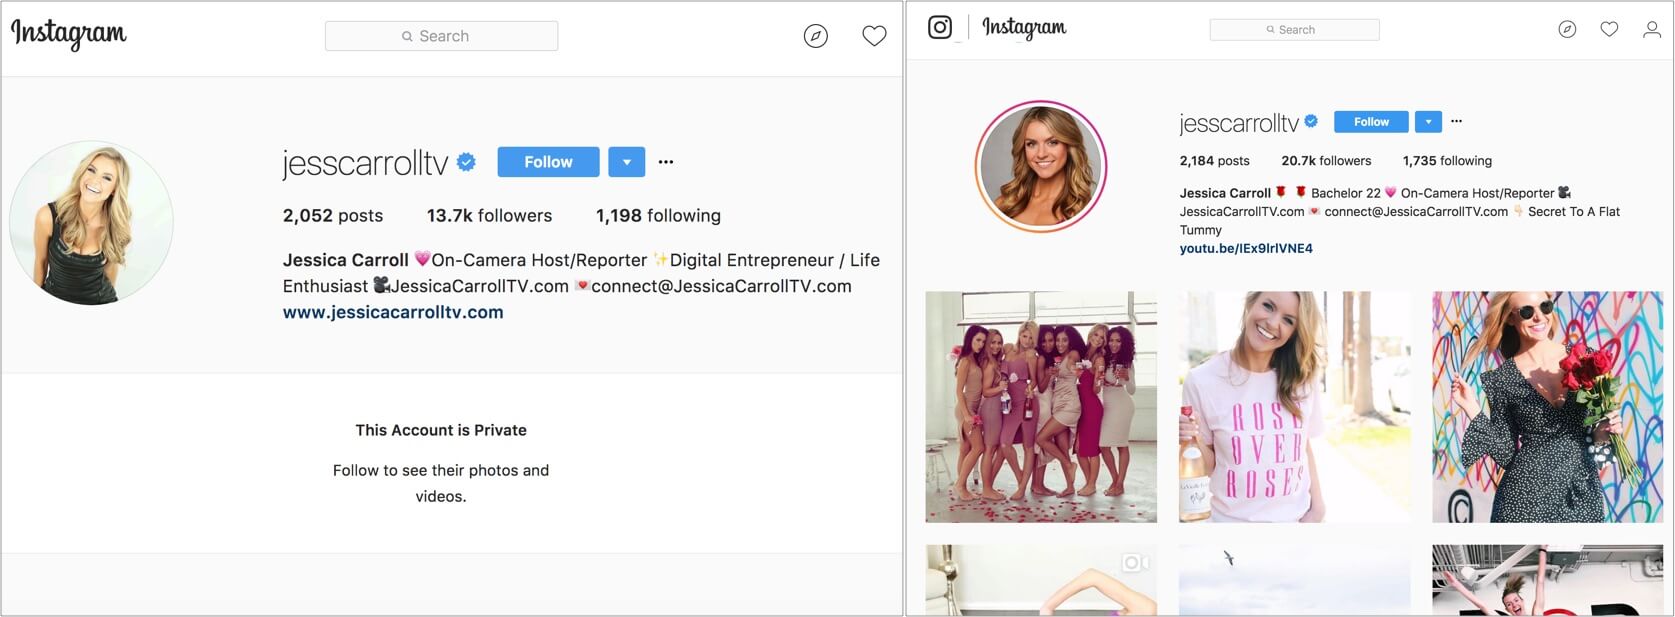 Jessica Instagram Followers from The Bachelor